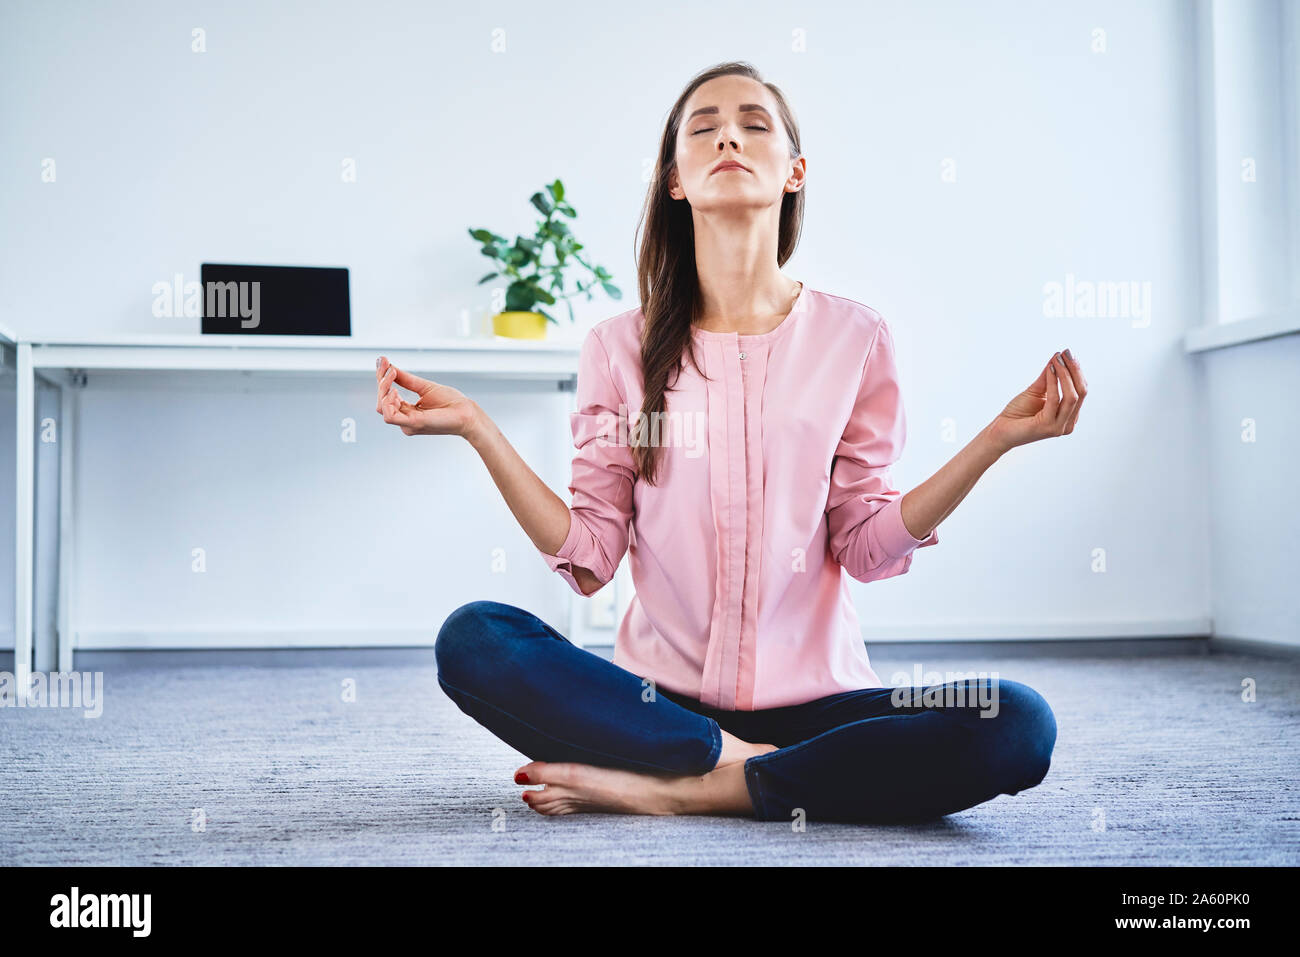 Young woman meditating on floor in office Stock Photo